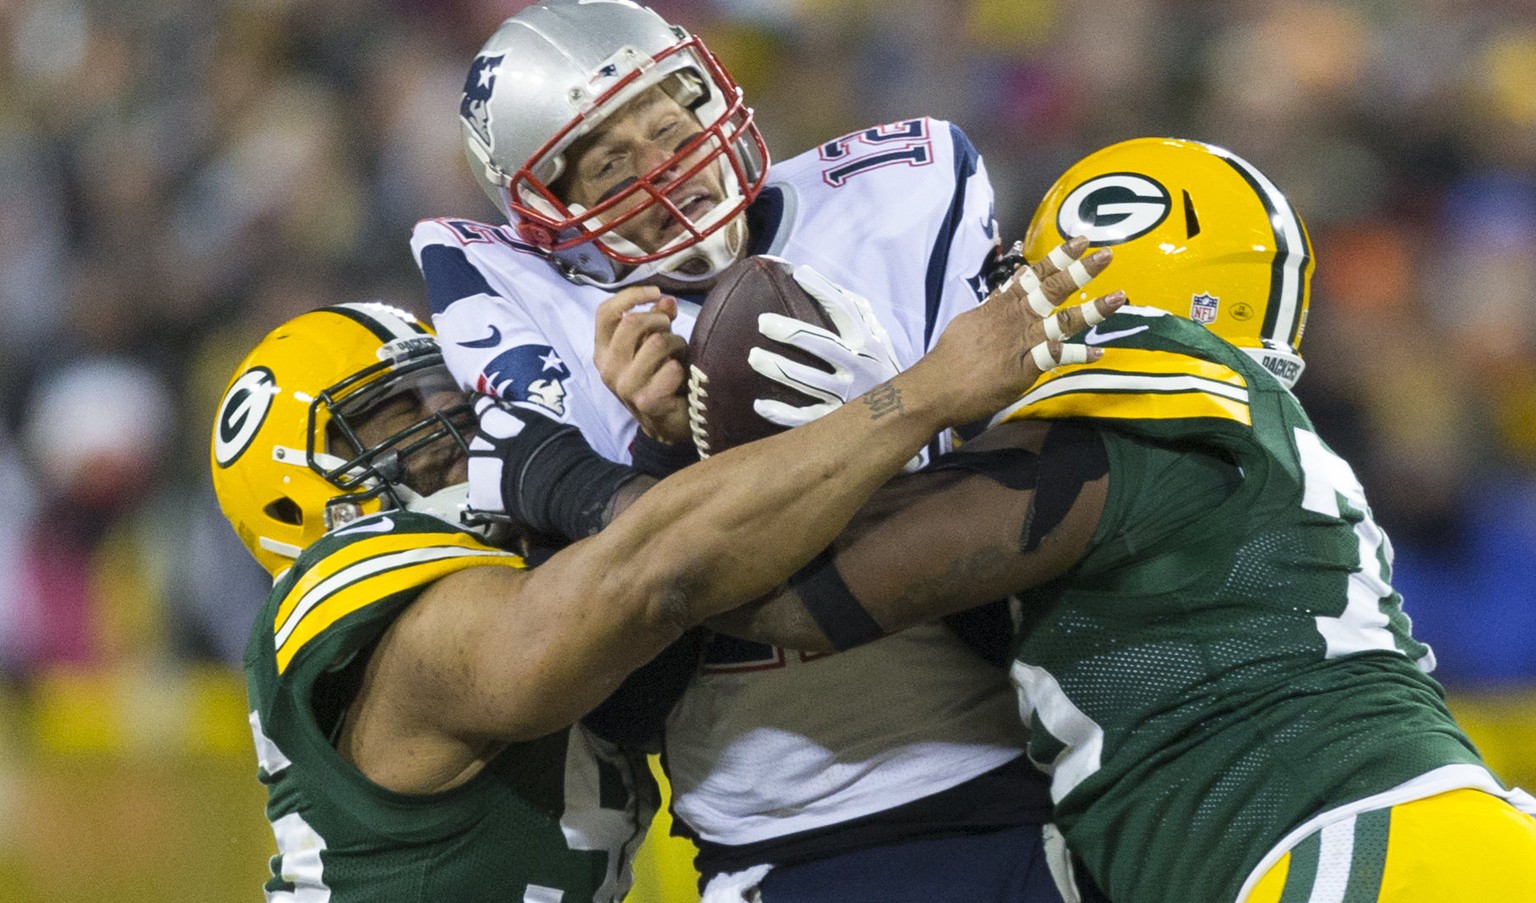 Nov 30, 2014; Green Bay, WI, USA; New England Patriots quarterback Tom Brady (12) is sacked by Green Bay Packers defensive end Mike Neal (96) and defensive end Mike Daniels (76) during the fourth quar ...